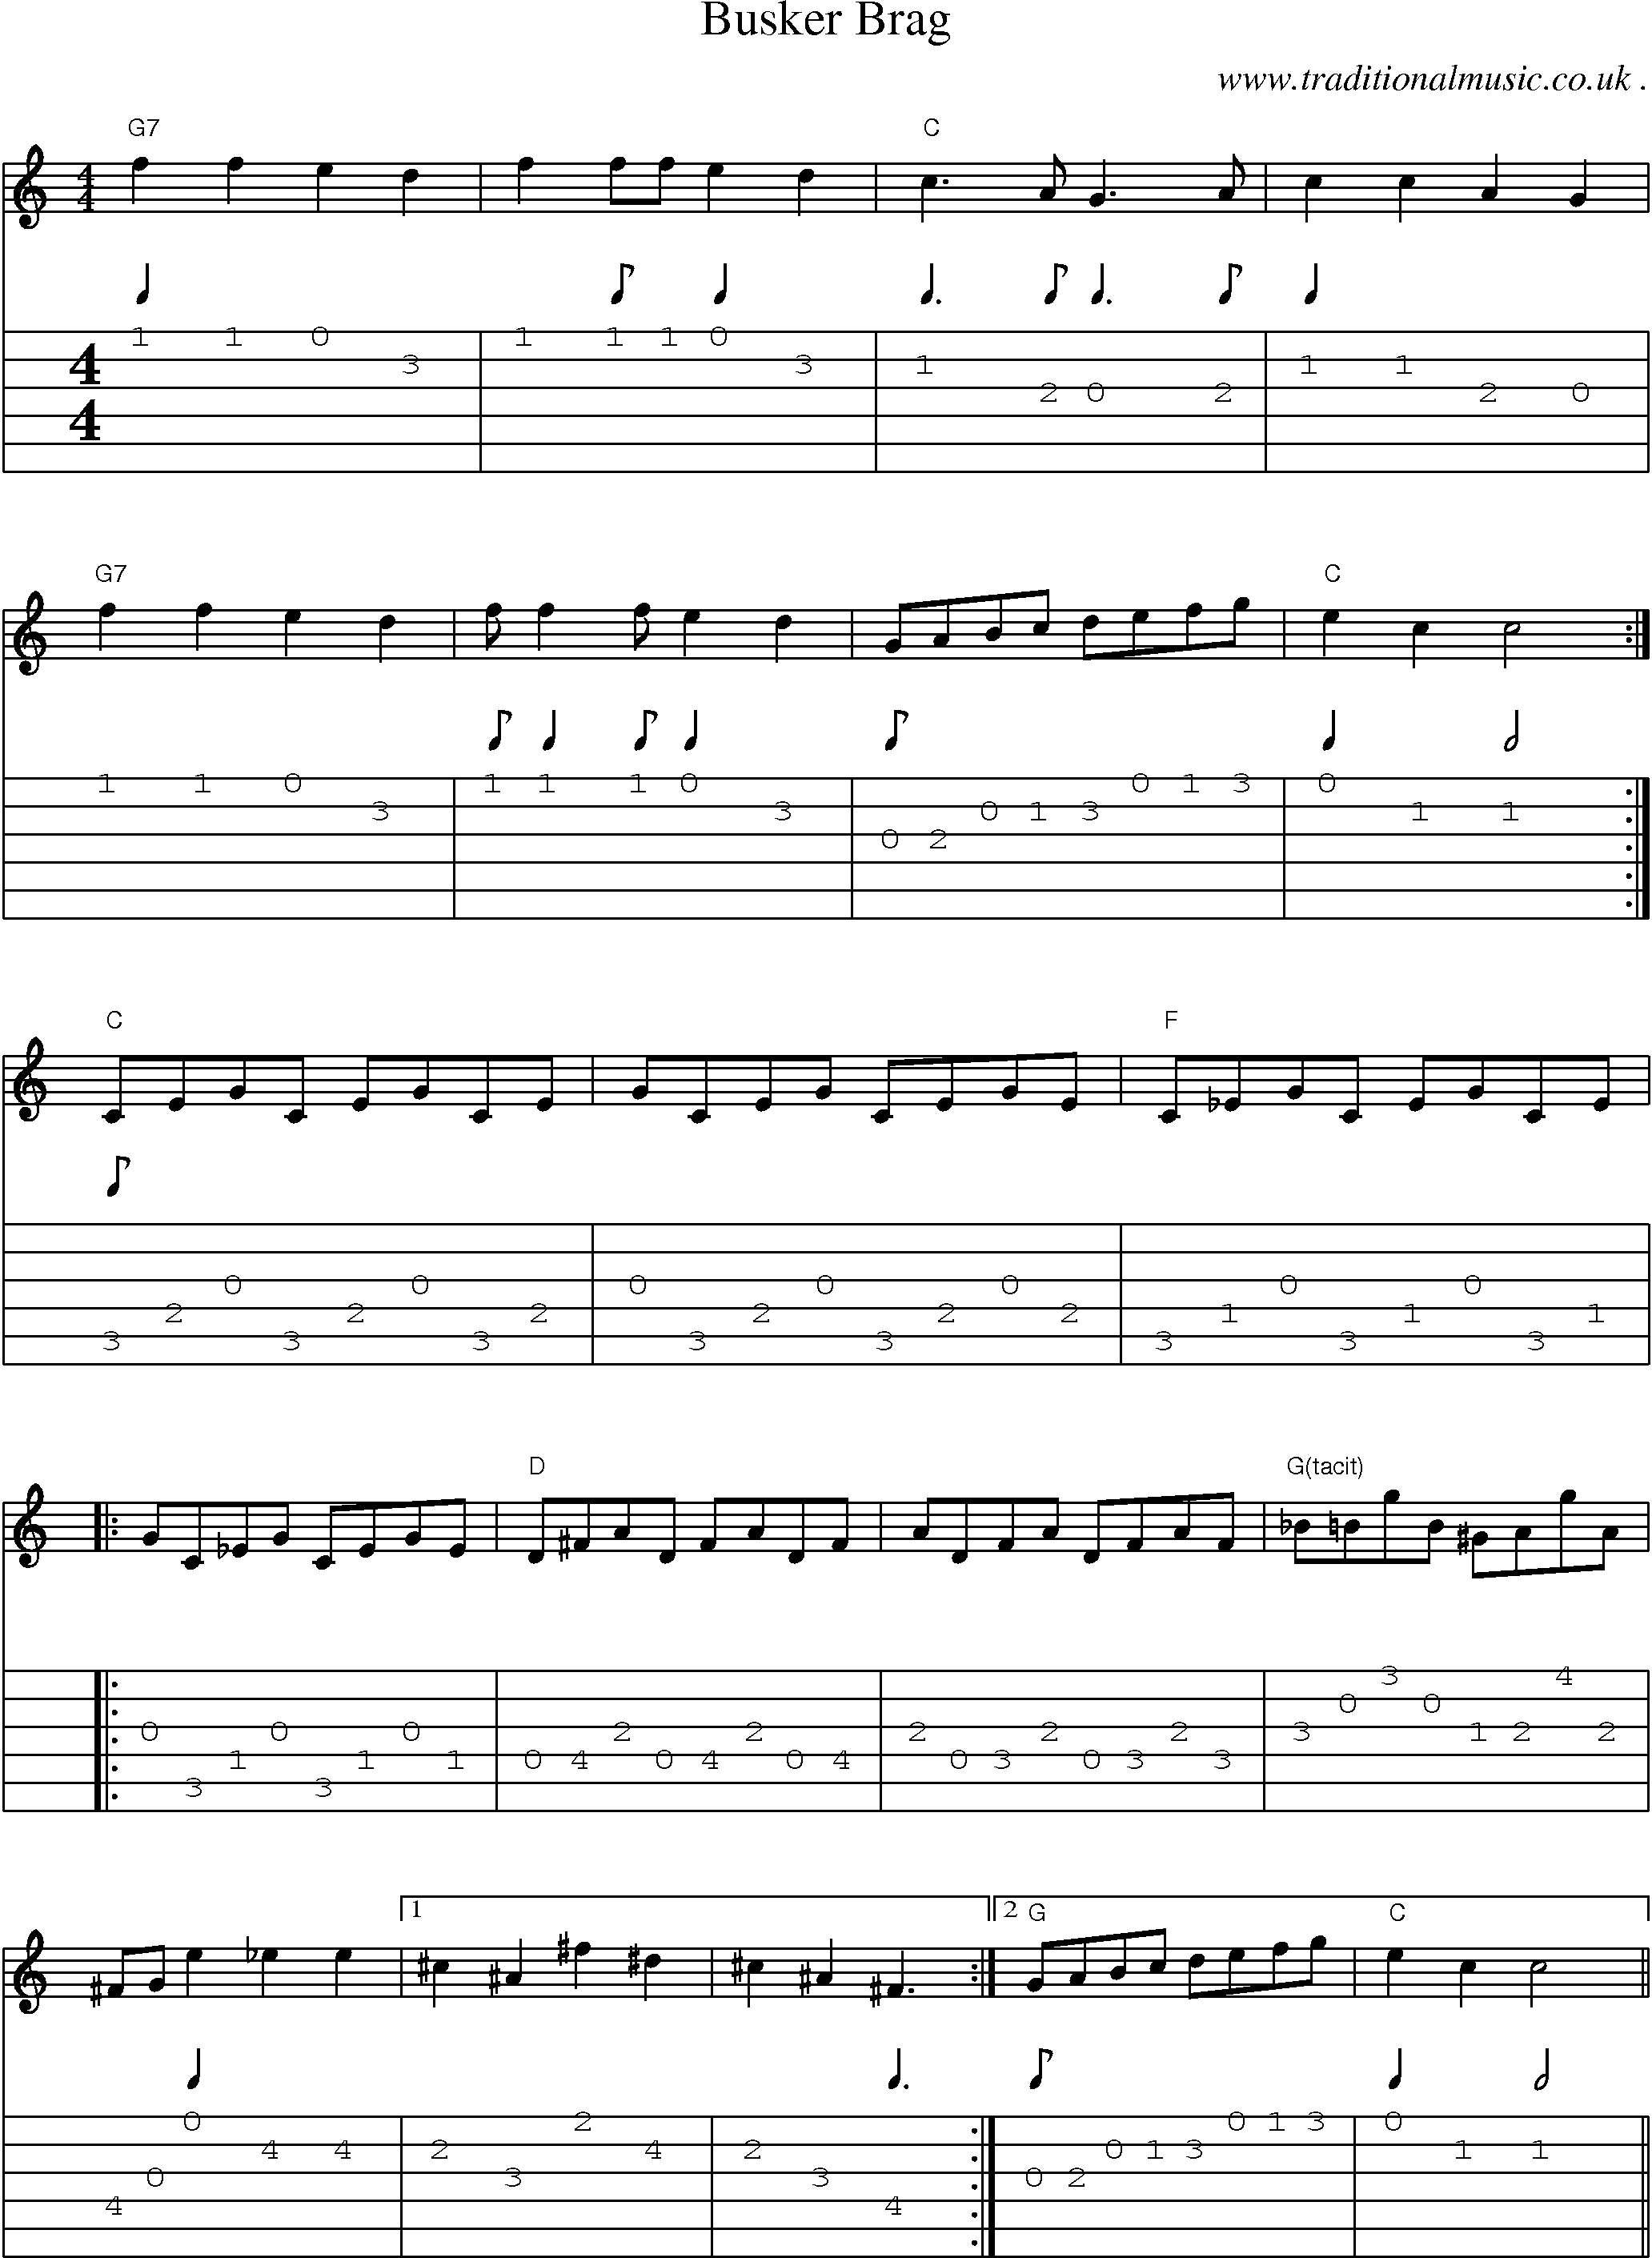 Sheet-Music and Guitar Tabs for Busker Brag